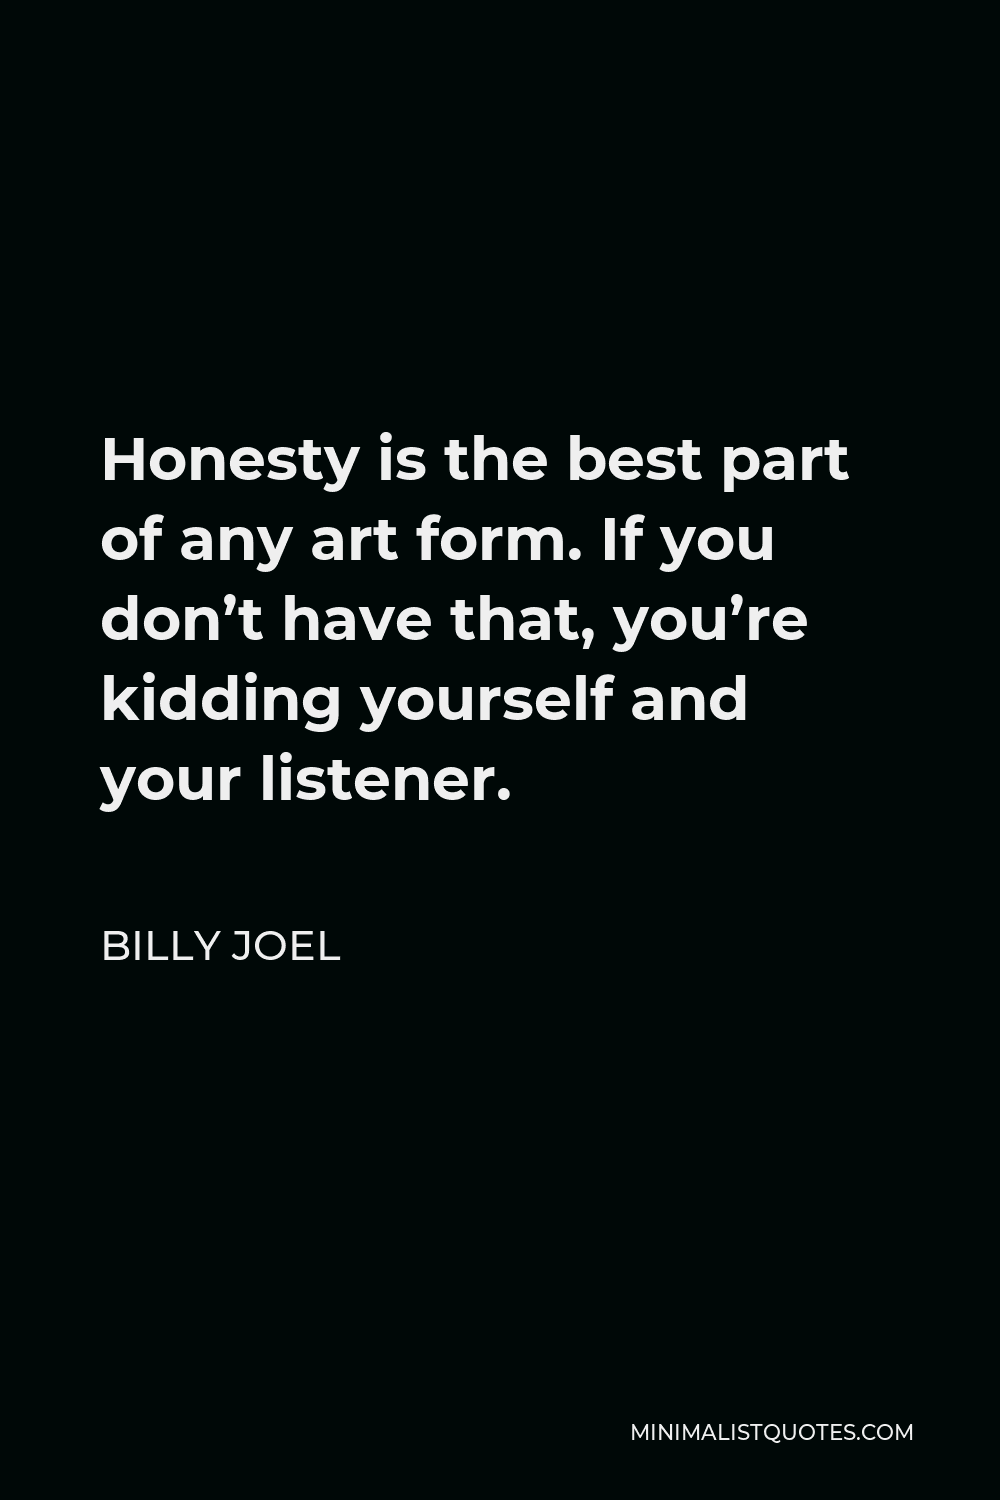 Billy Joel Quote - Honesty is the best part of any art form. If you don’t have that, you’re kidding yourself and your listener.